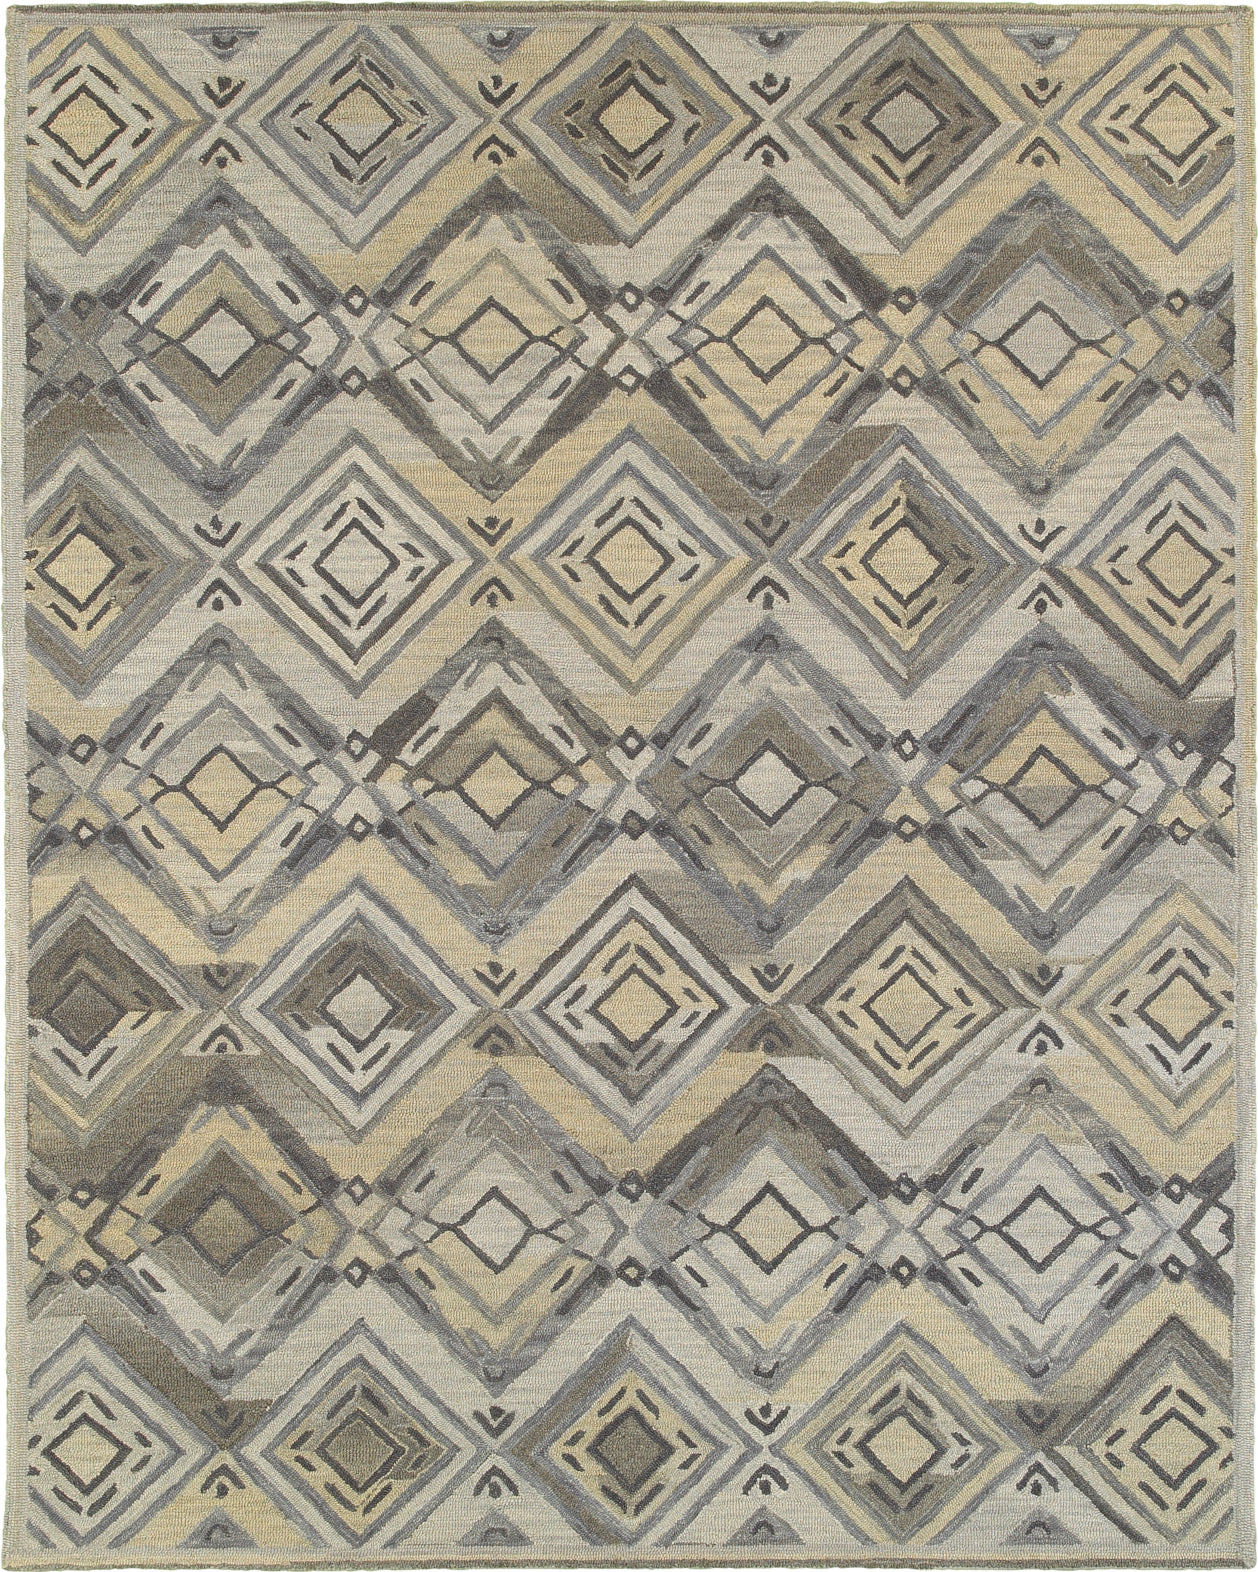 LR Resources Integrity 12014 Flax Area Rug main image